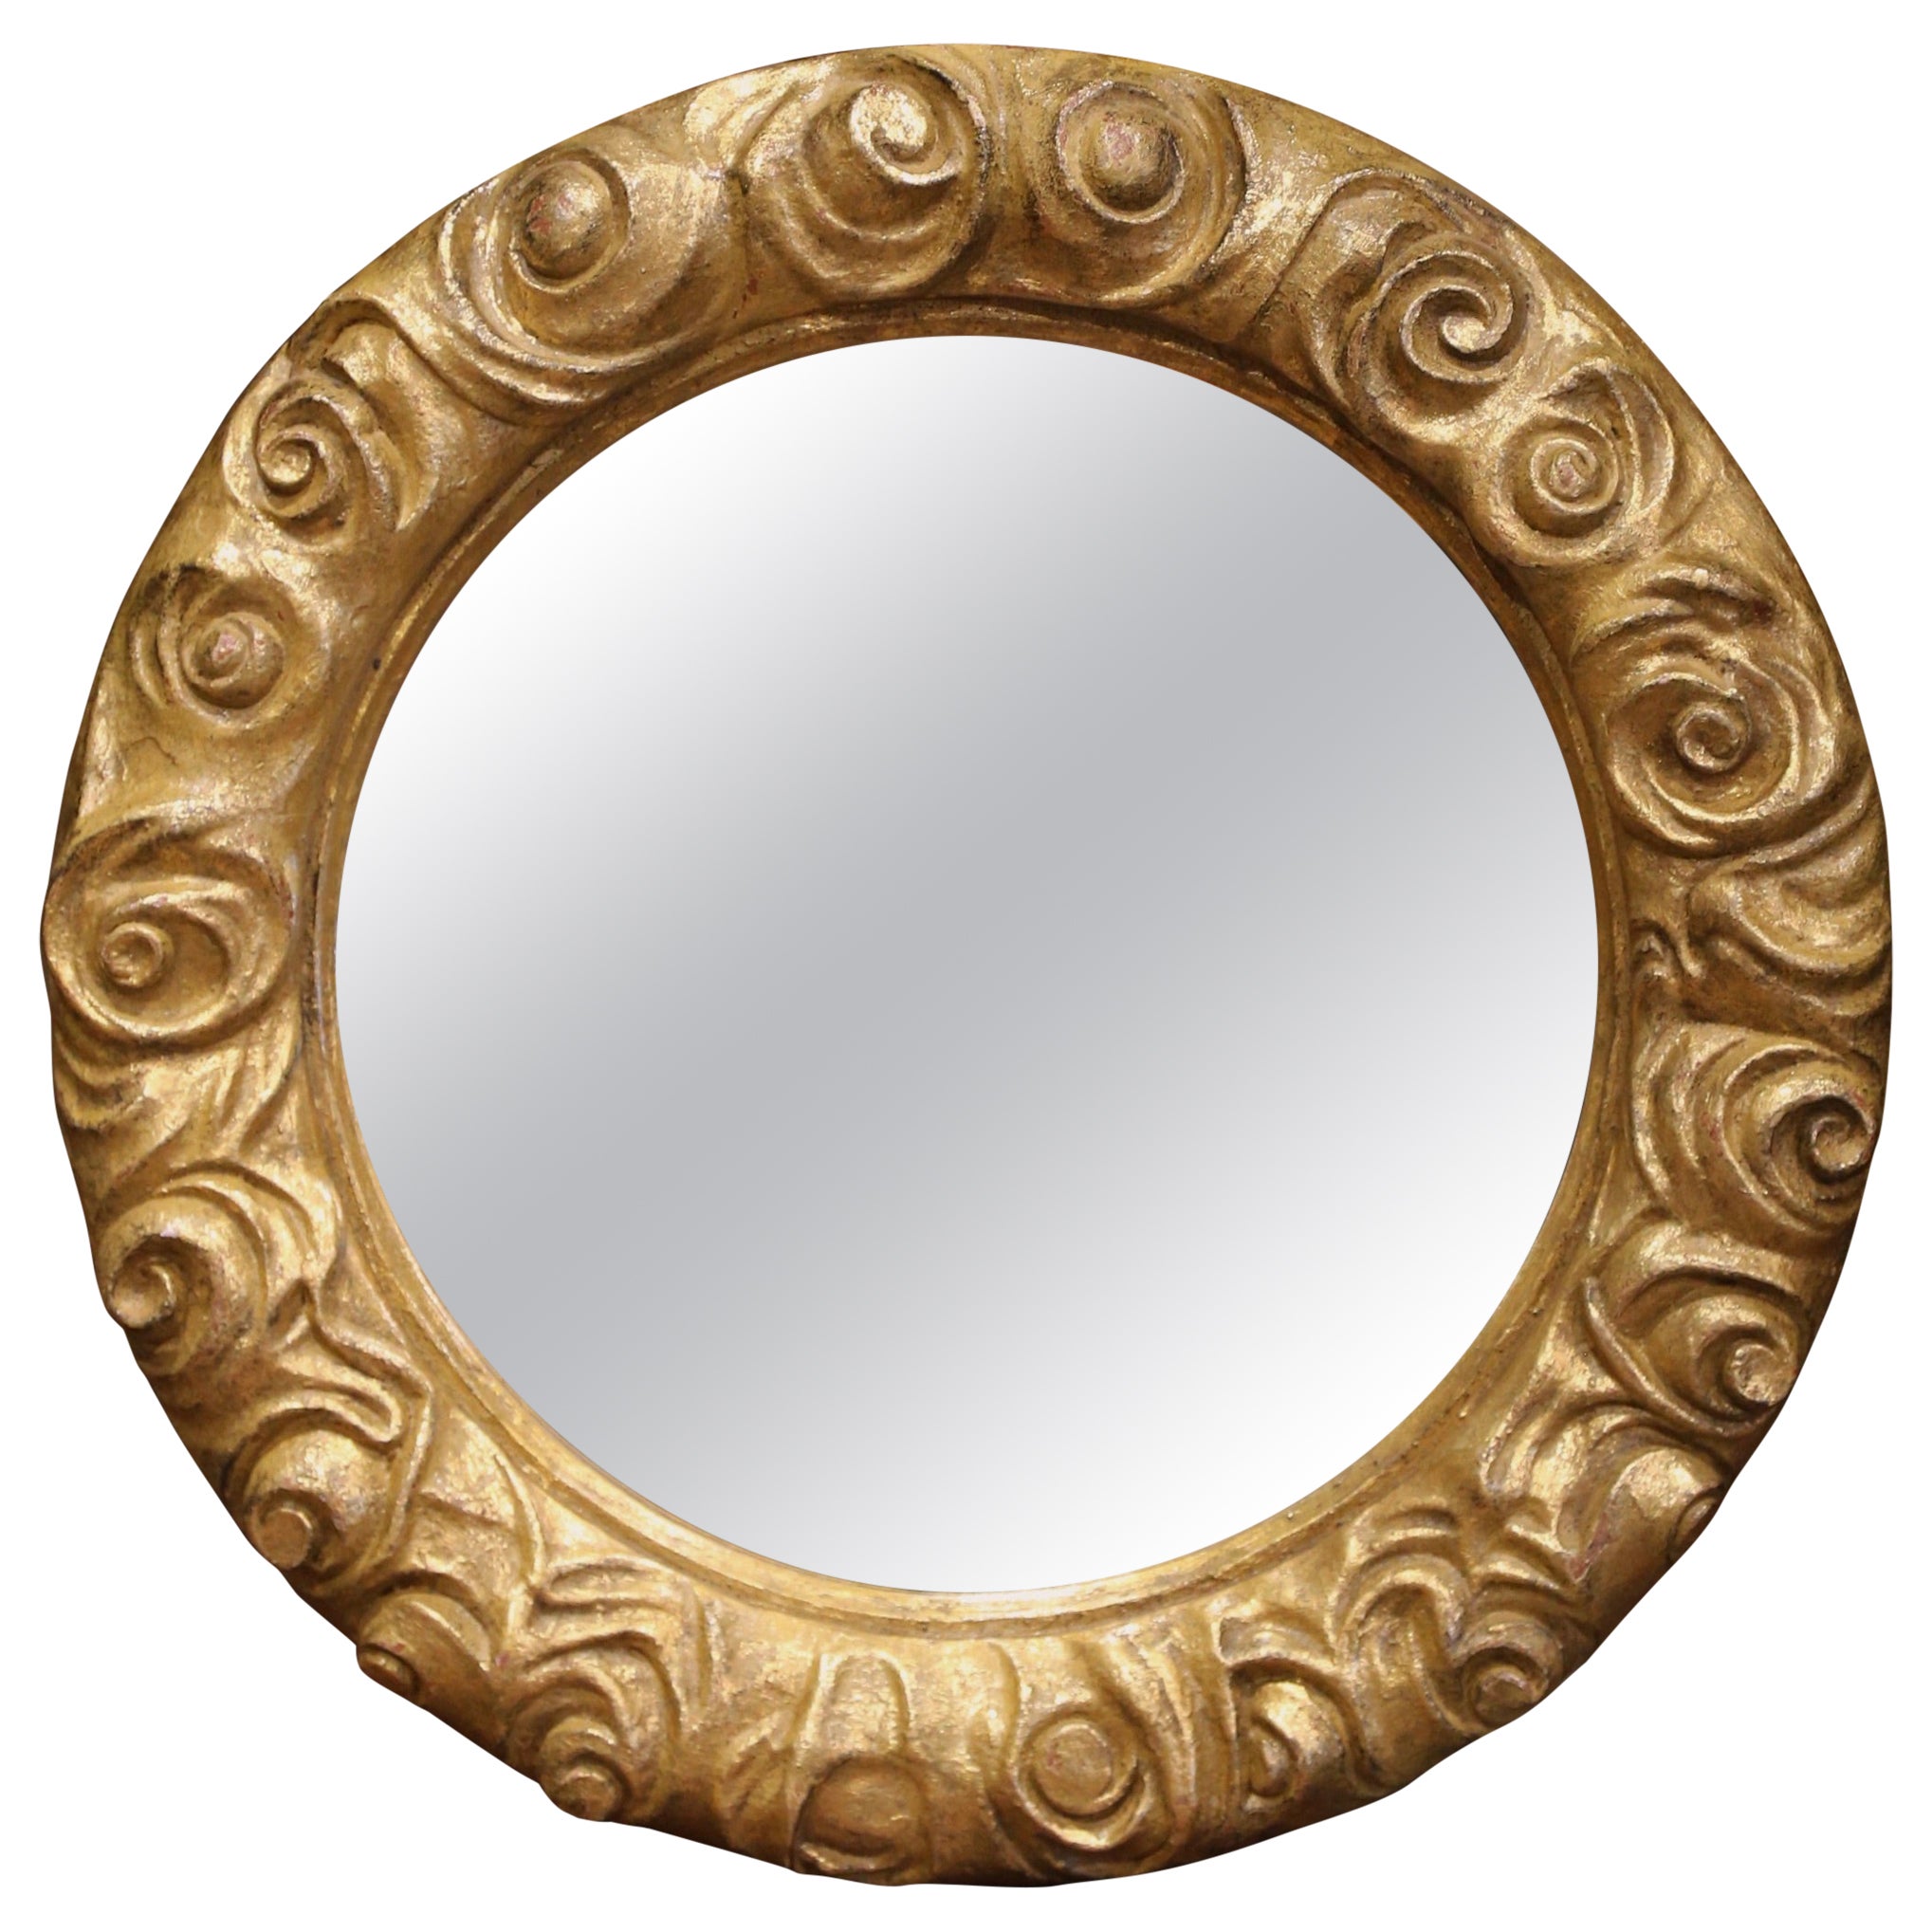 Mid-20th Century French Carved Gilt Wood Round Mirror with Floral Motifs For Sale